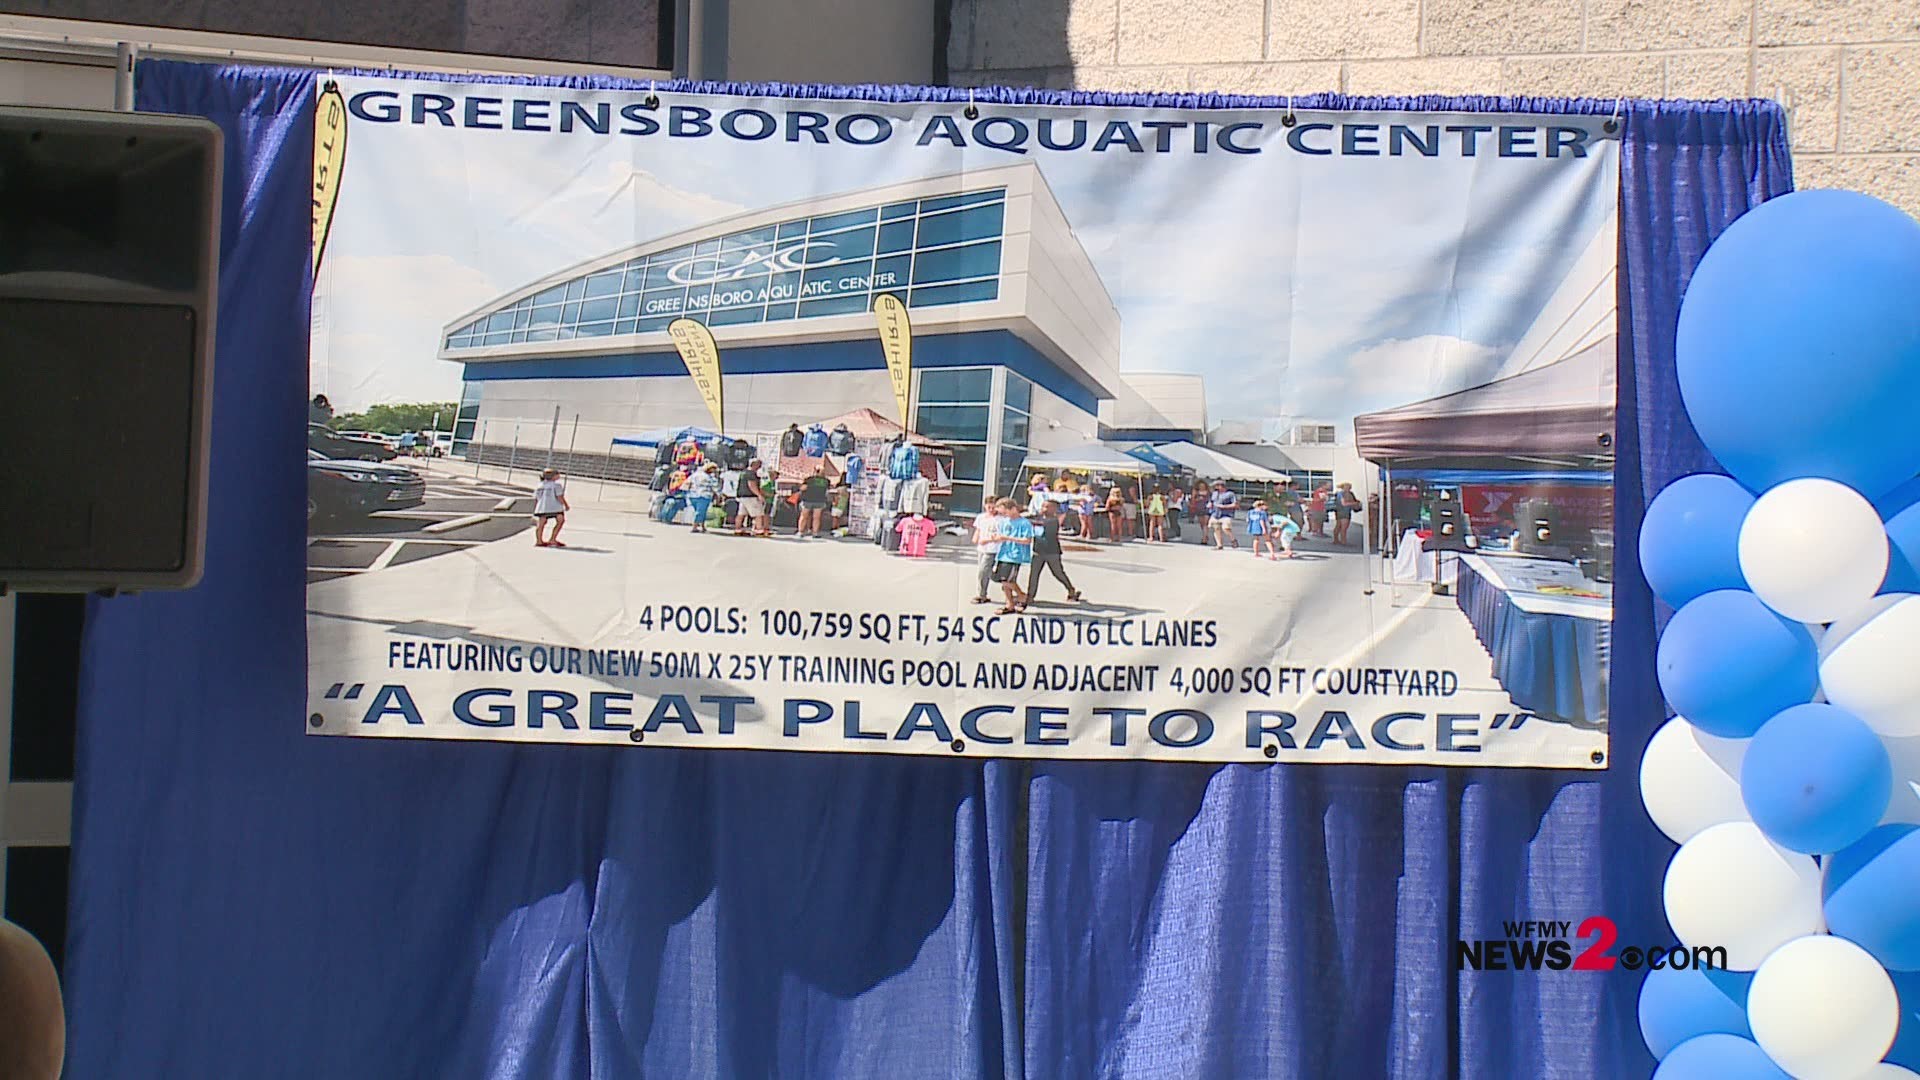 The Greensboro Aquatic Center is now the largest indoor swim facility in the nation with the addition of a fourth pool.